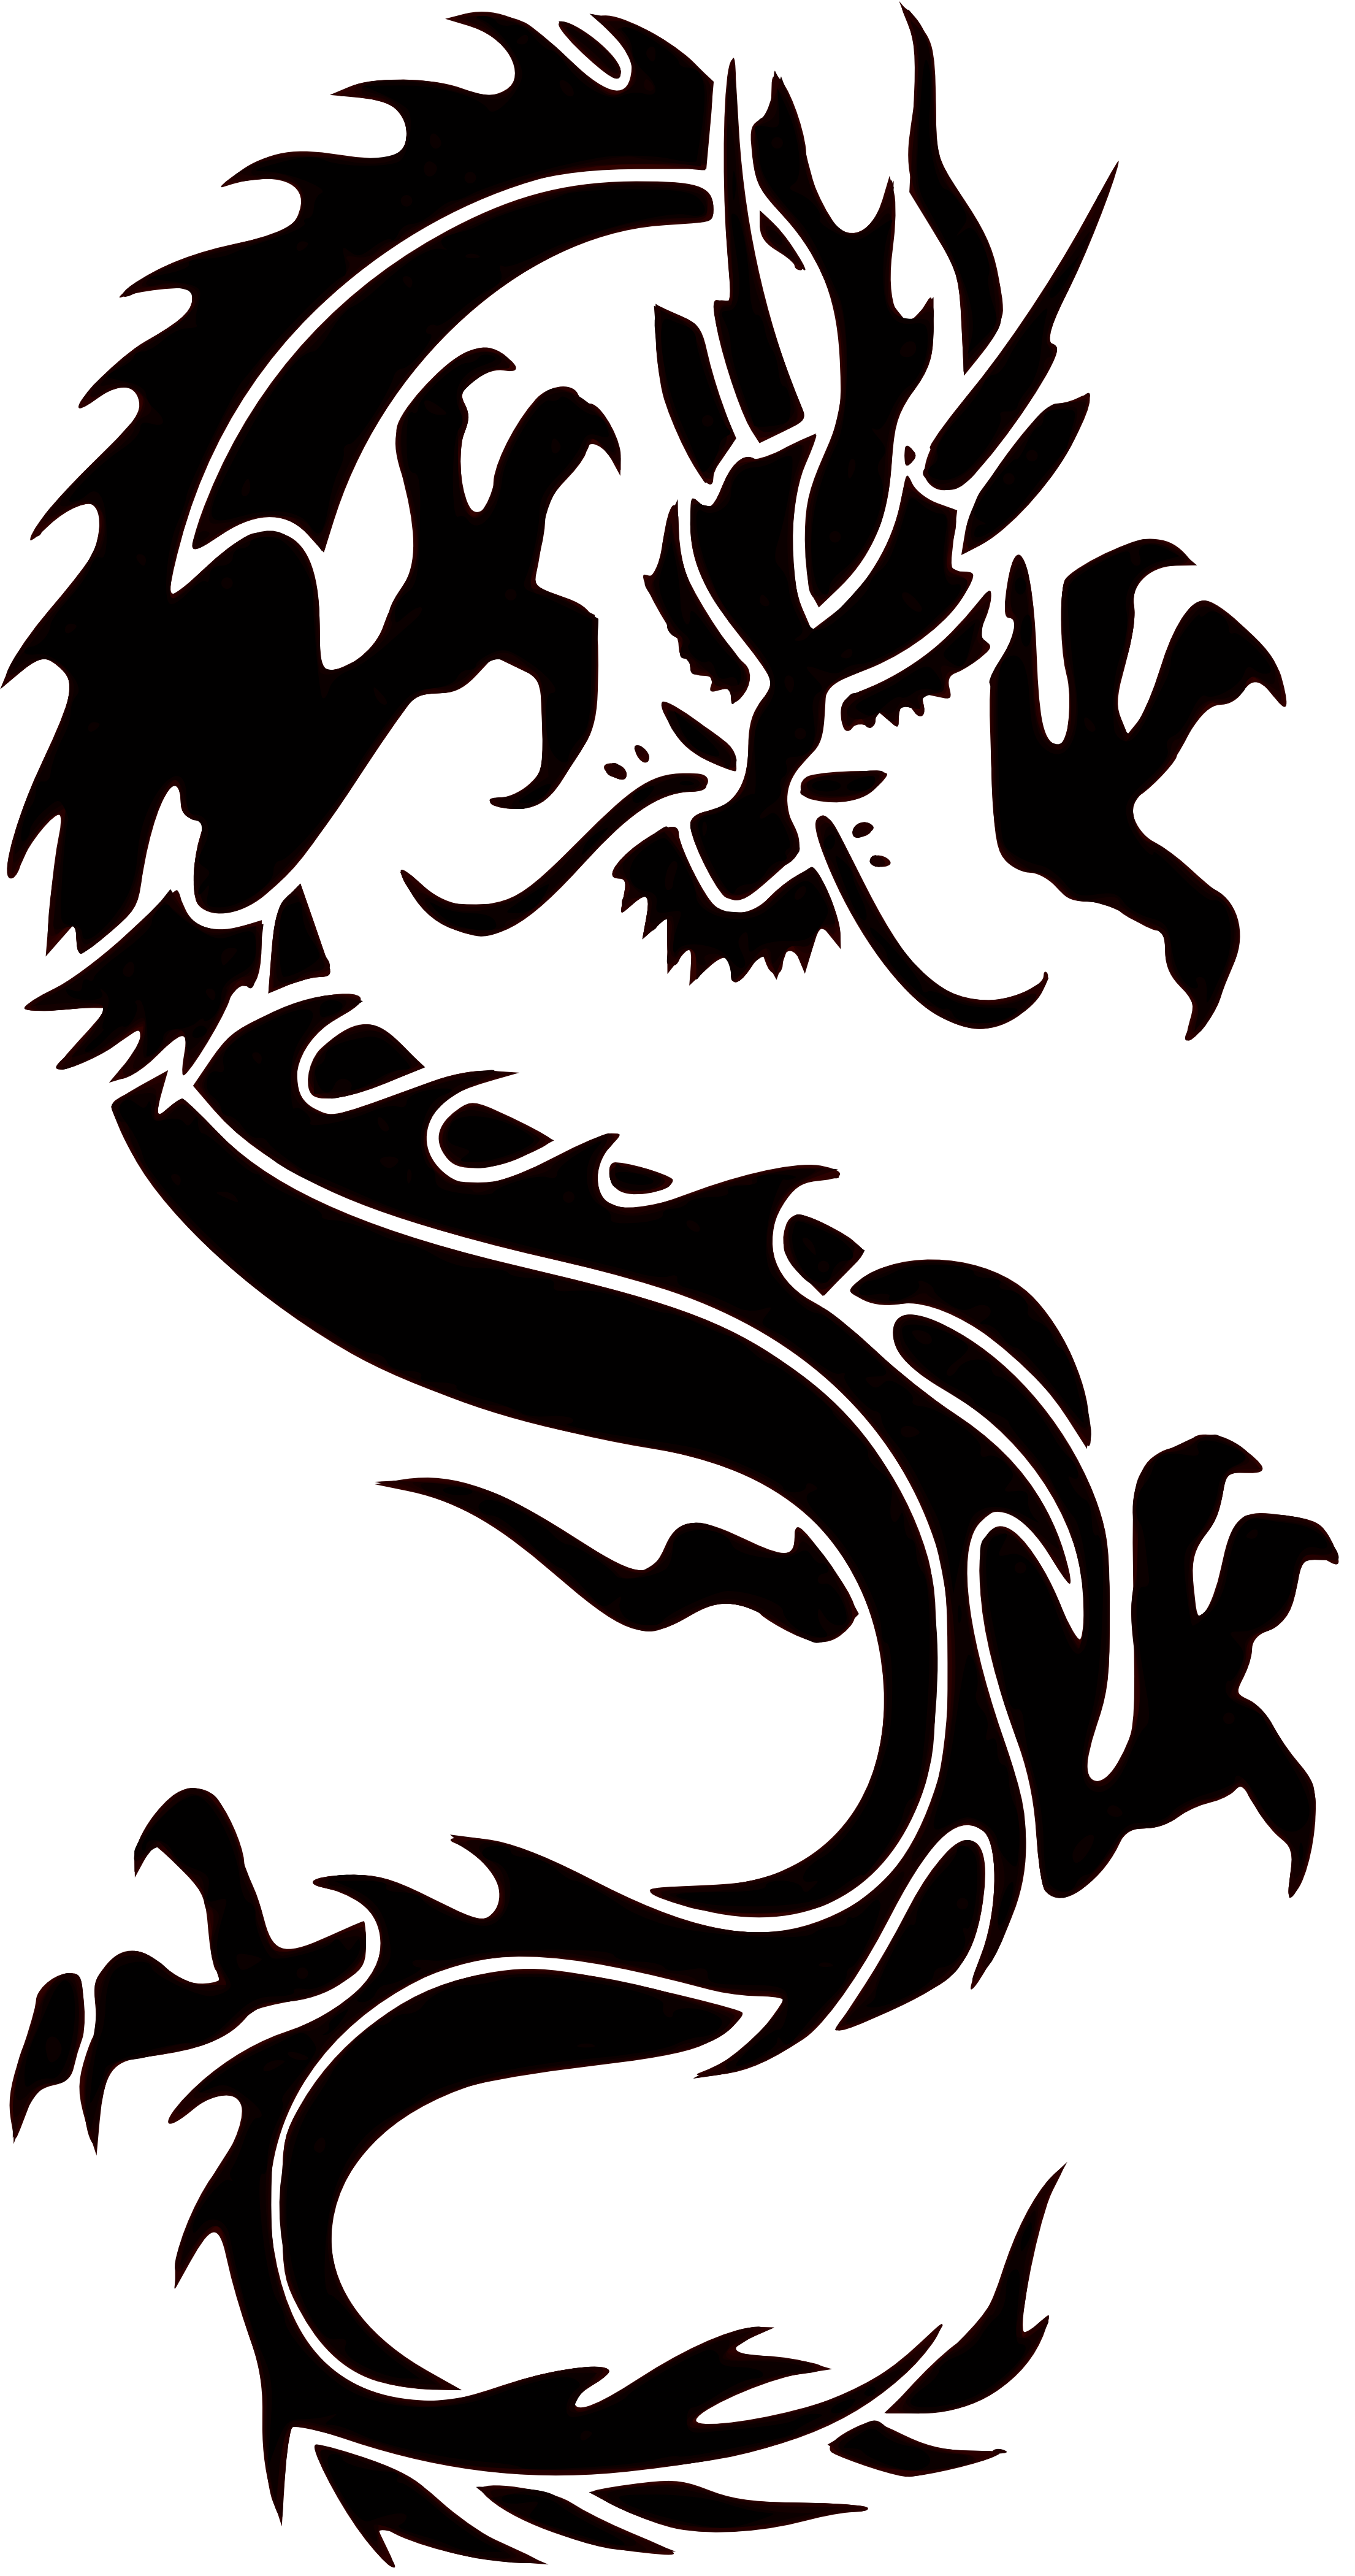 Chinese Dragon Wall Painting by pjhiggins1965 on Clipart library